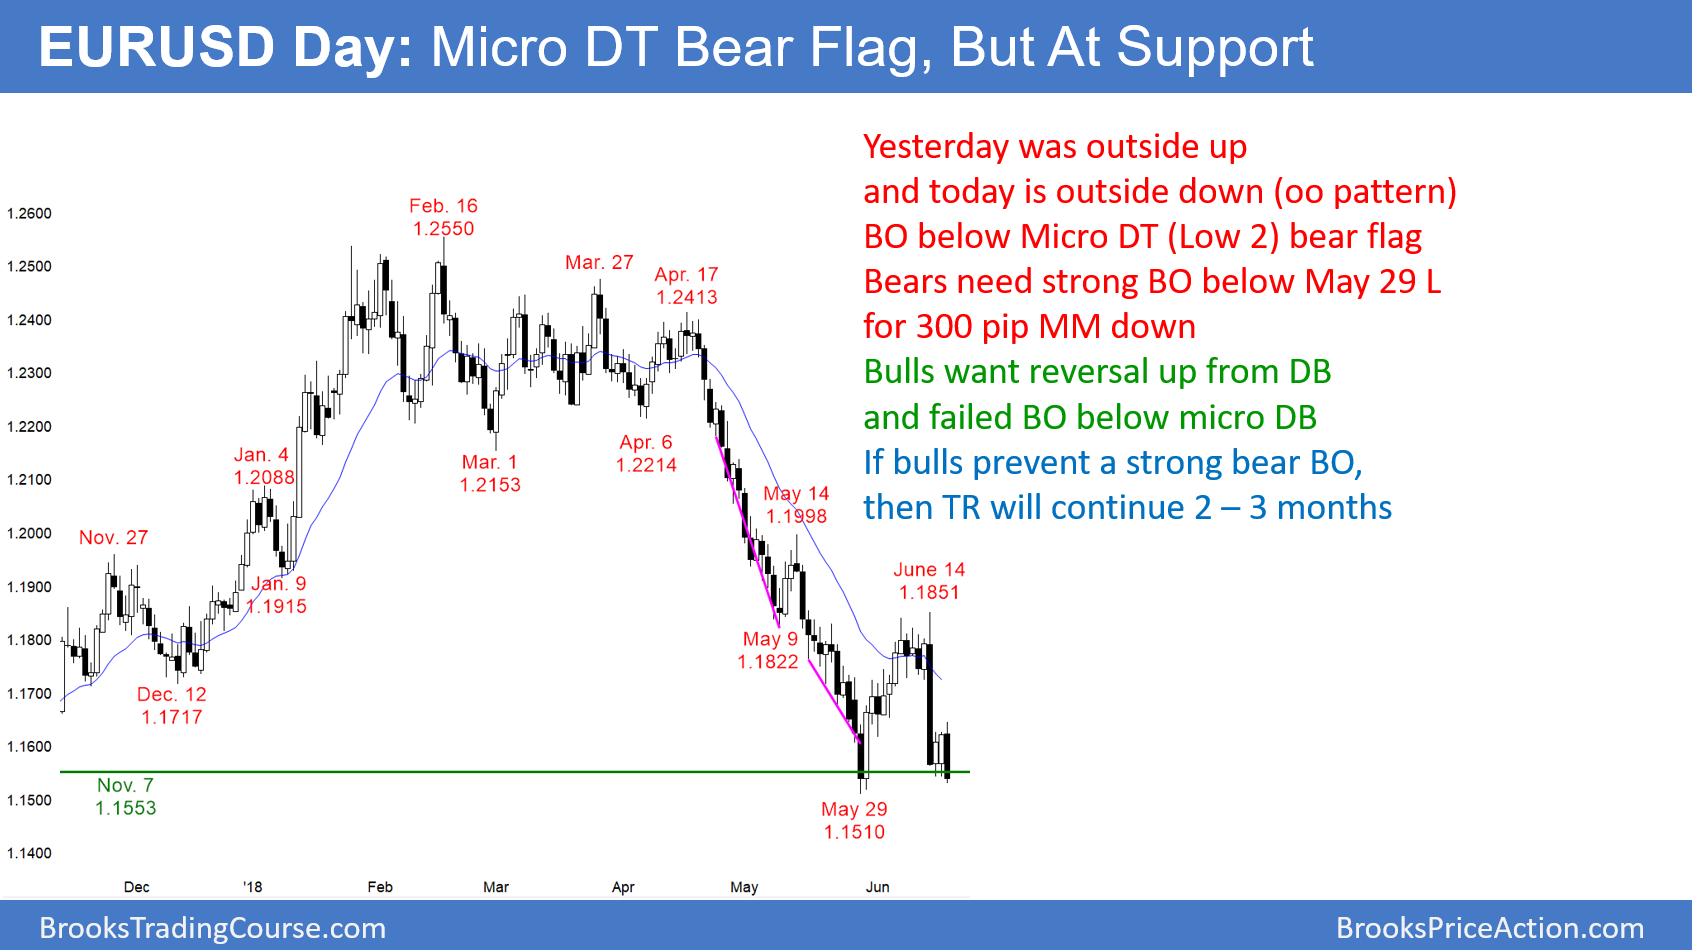 EUR/USD Day Micro DT Bear Flag But At Support